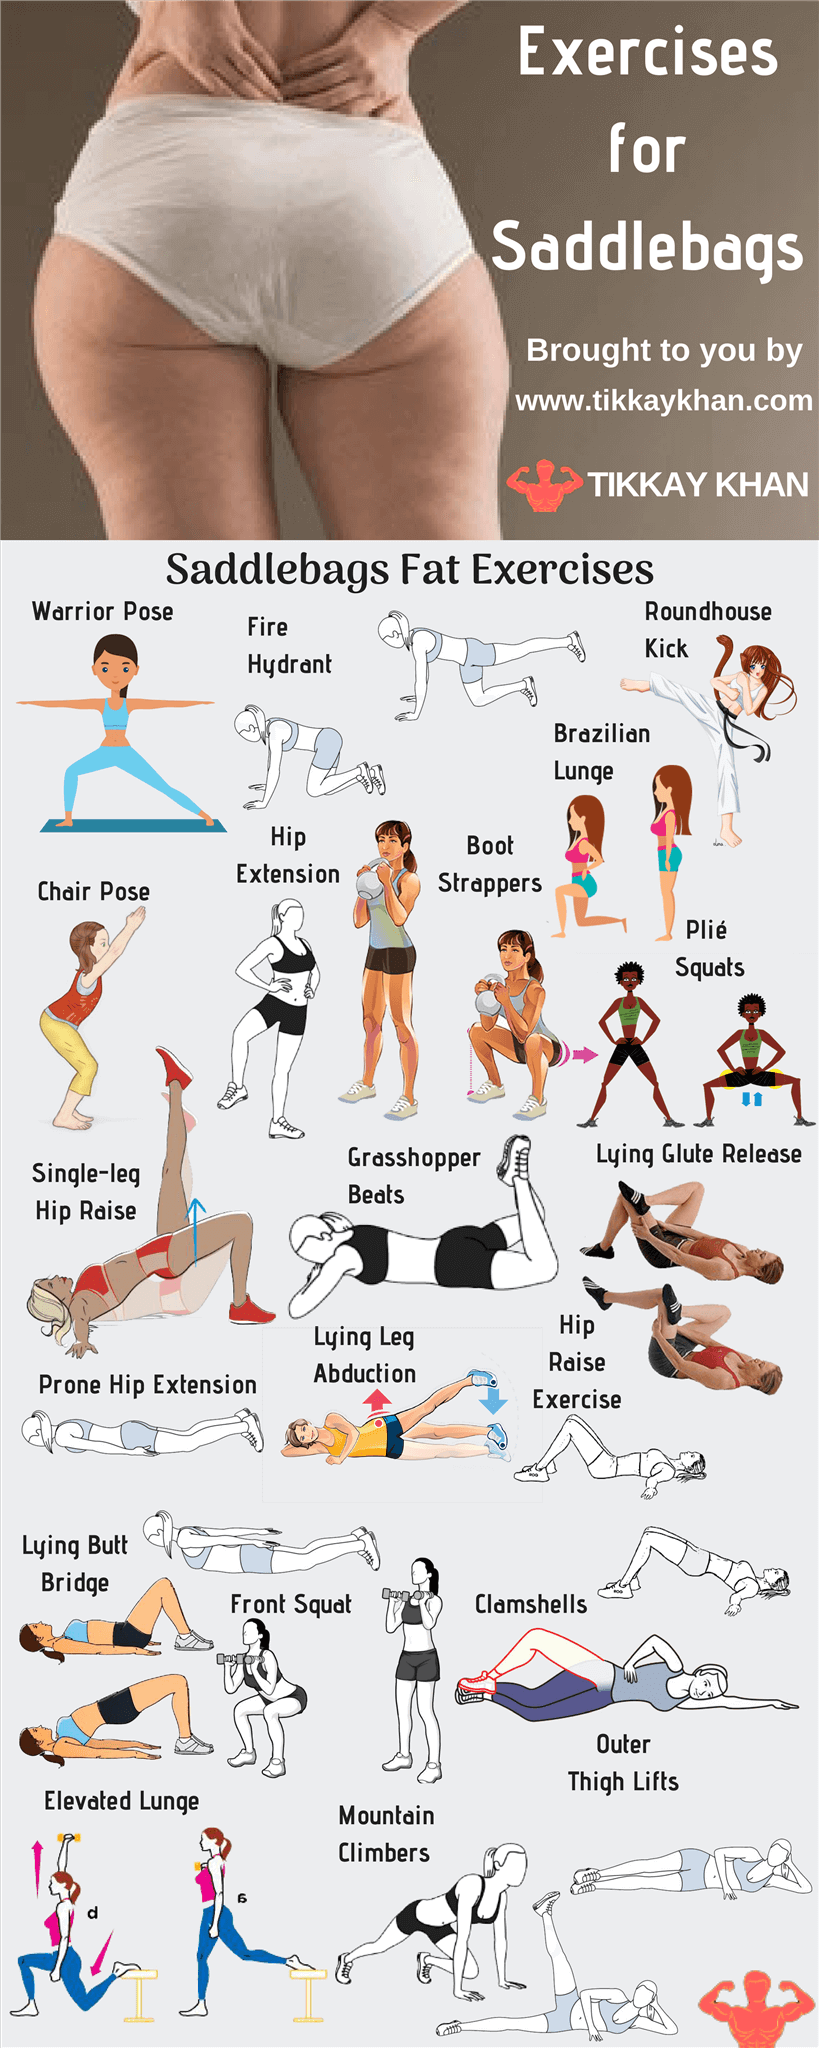 exercises for saddlebags and cellulite